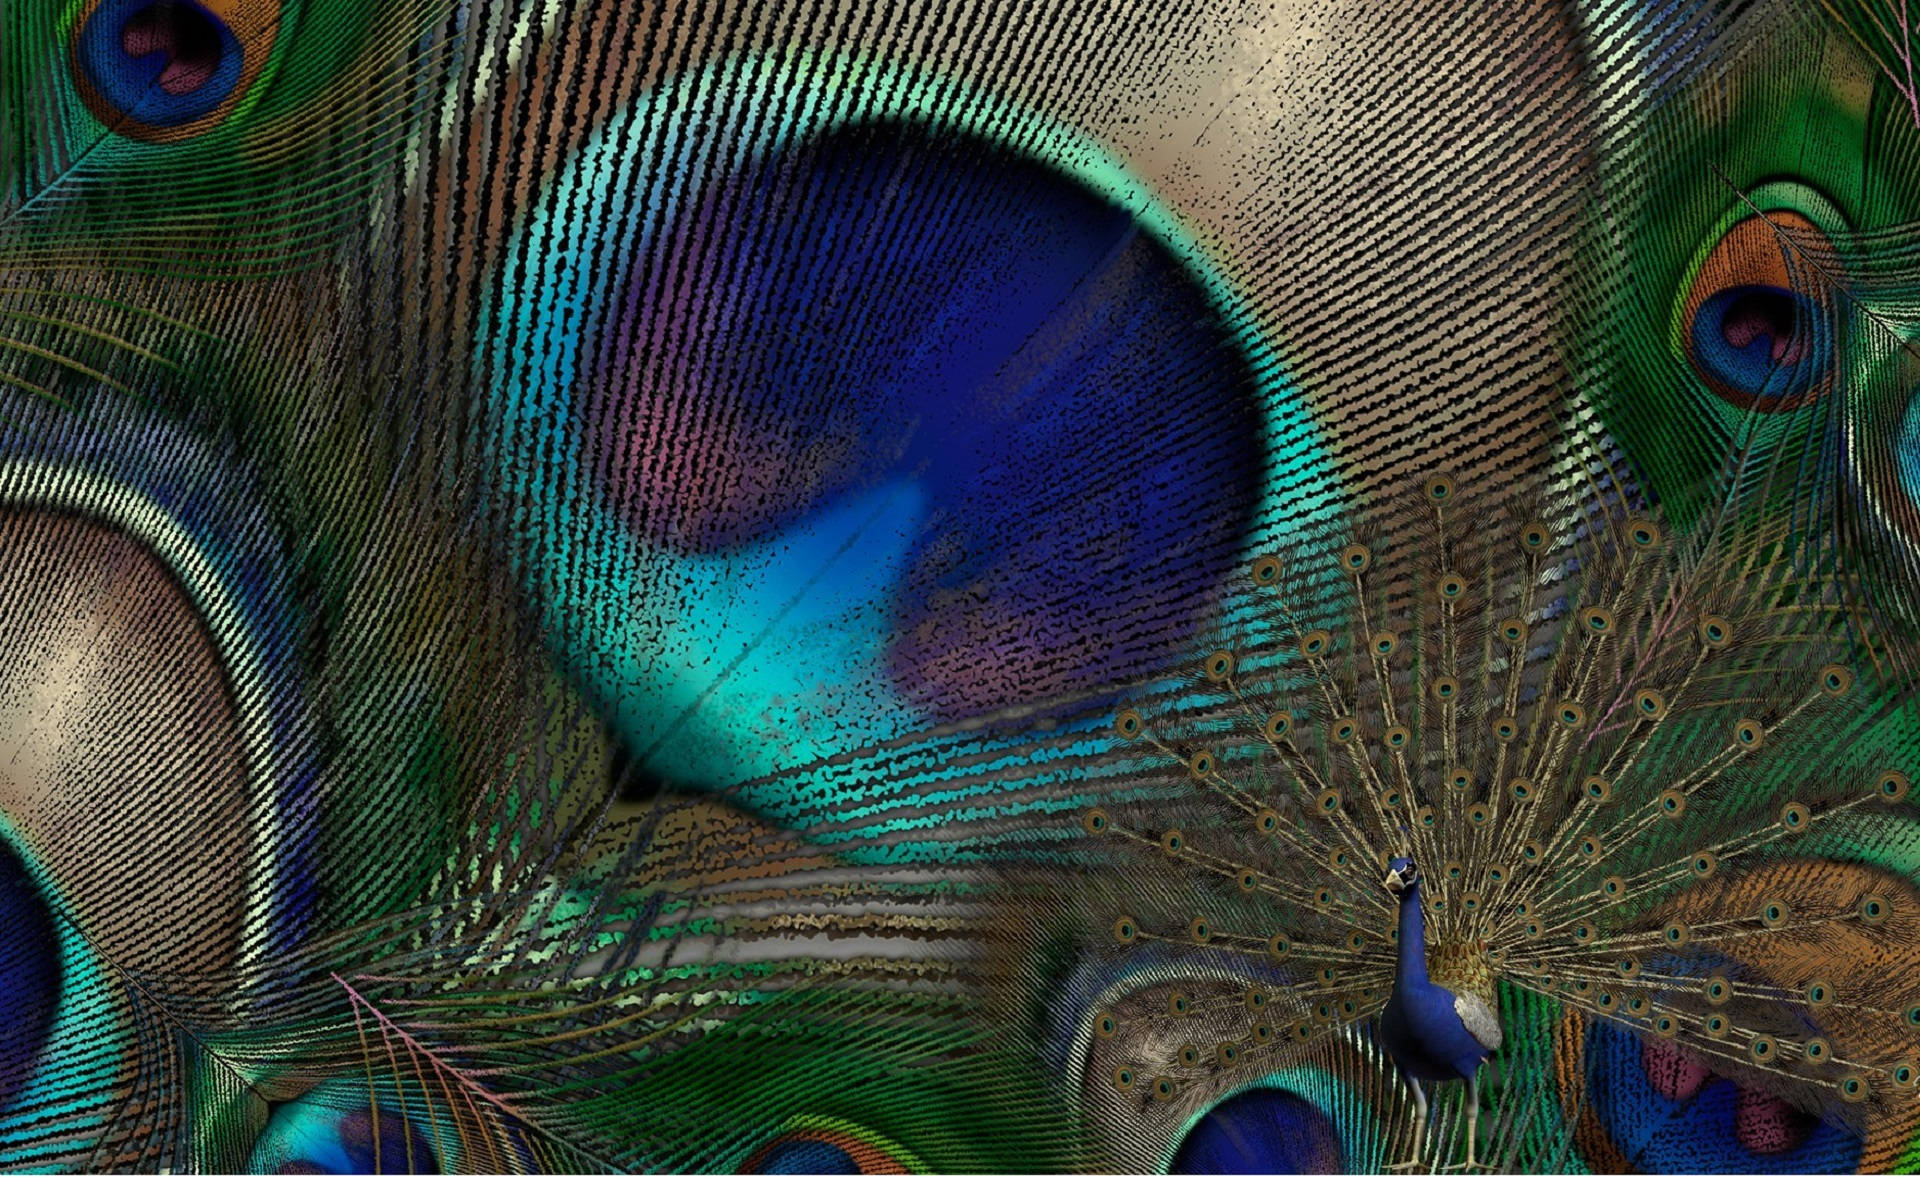 Caption: Graceful Artistry Of The Whimsical Peacock Feather Background